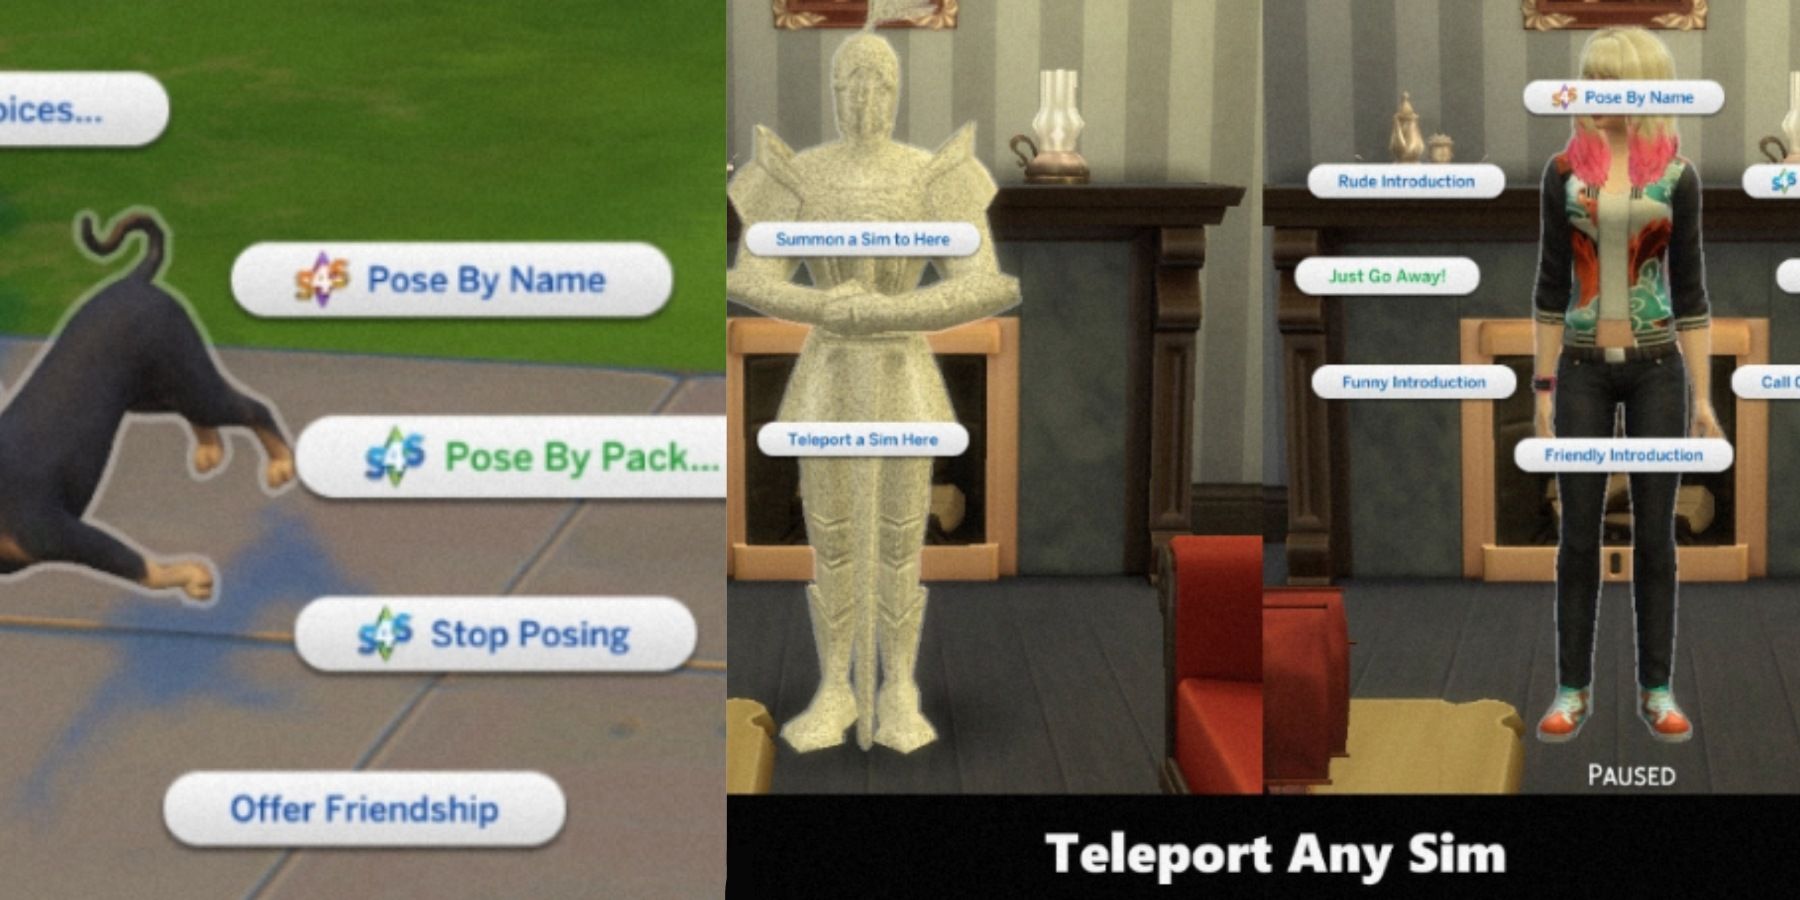 the pose player mod and the teleport any sim mod